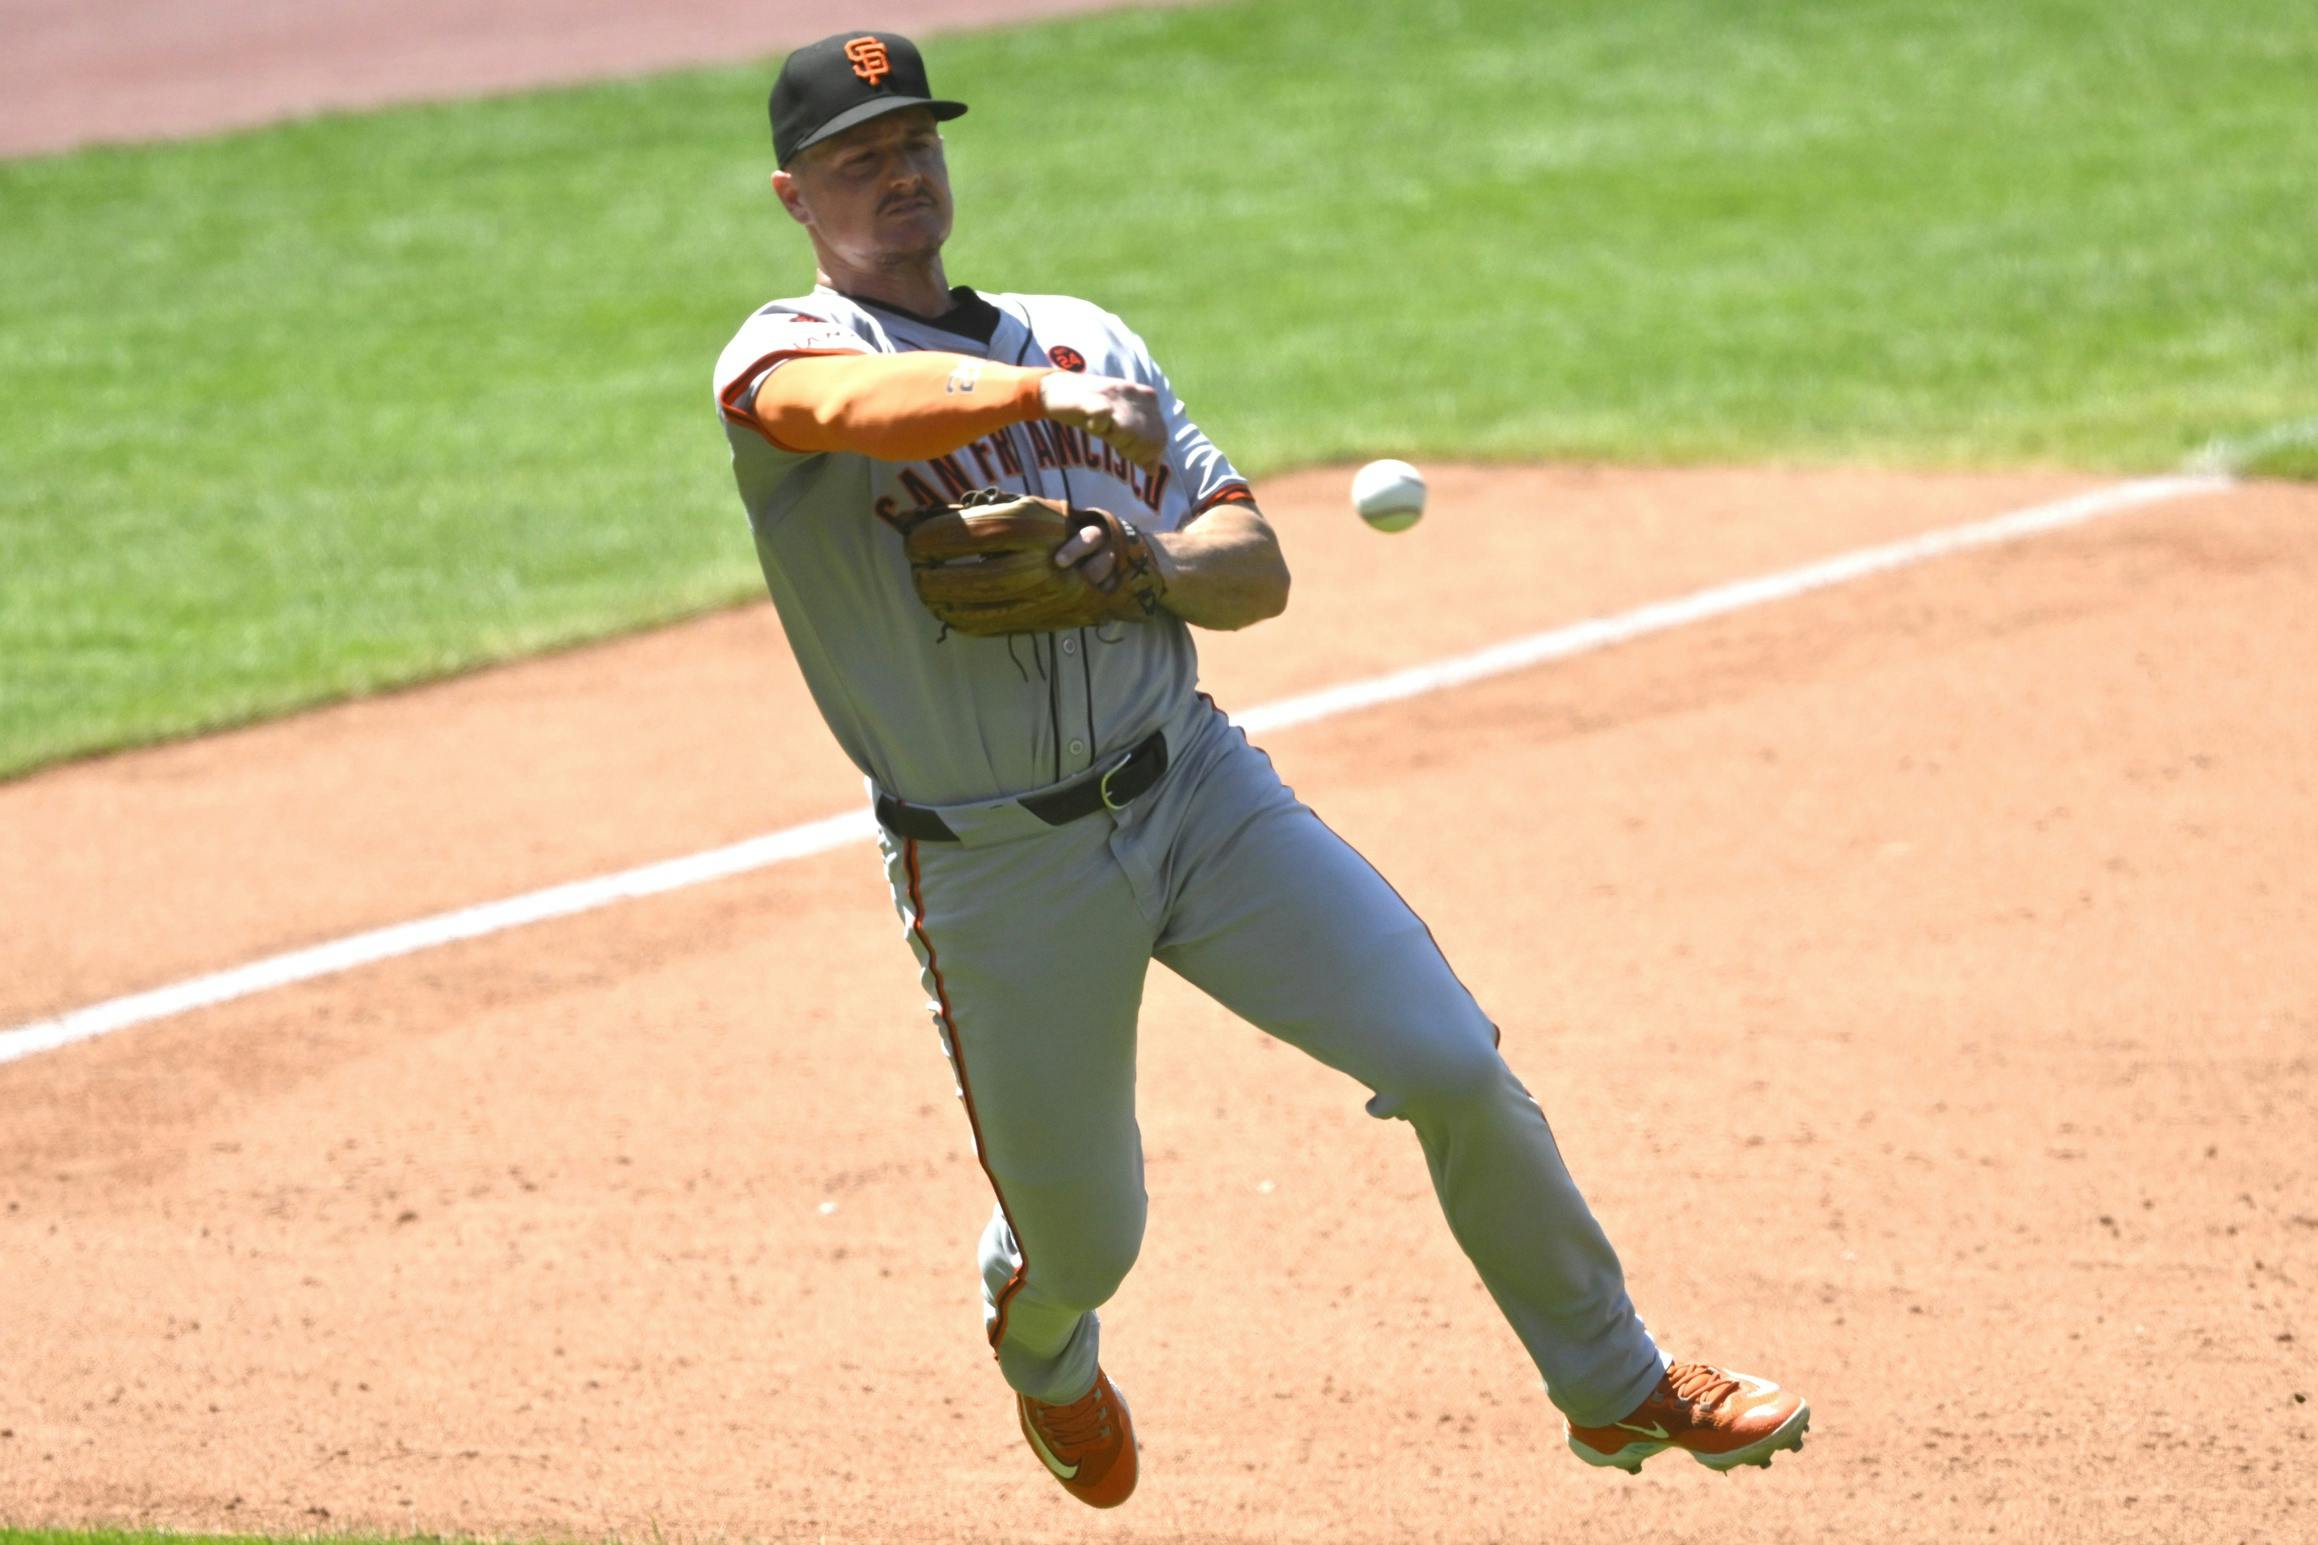 San Francisco Giants third baseman Matt Chapman (26) throws to first base in the sixth inning against the Cleveland Guardians at Progressive Field.